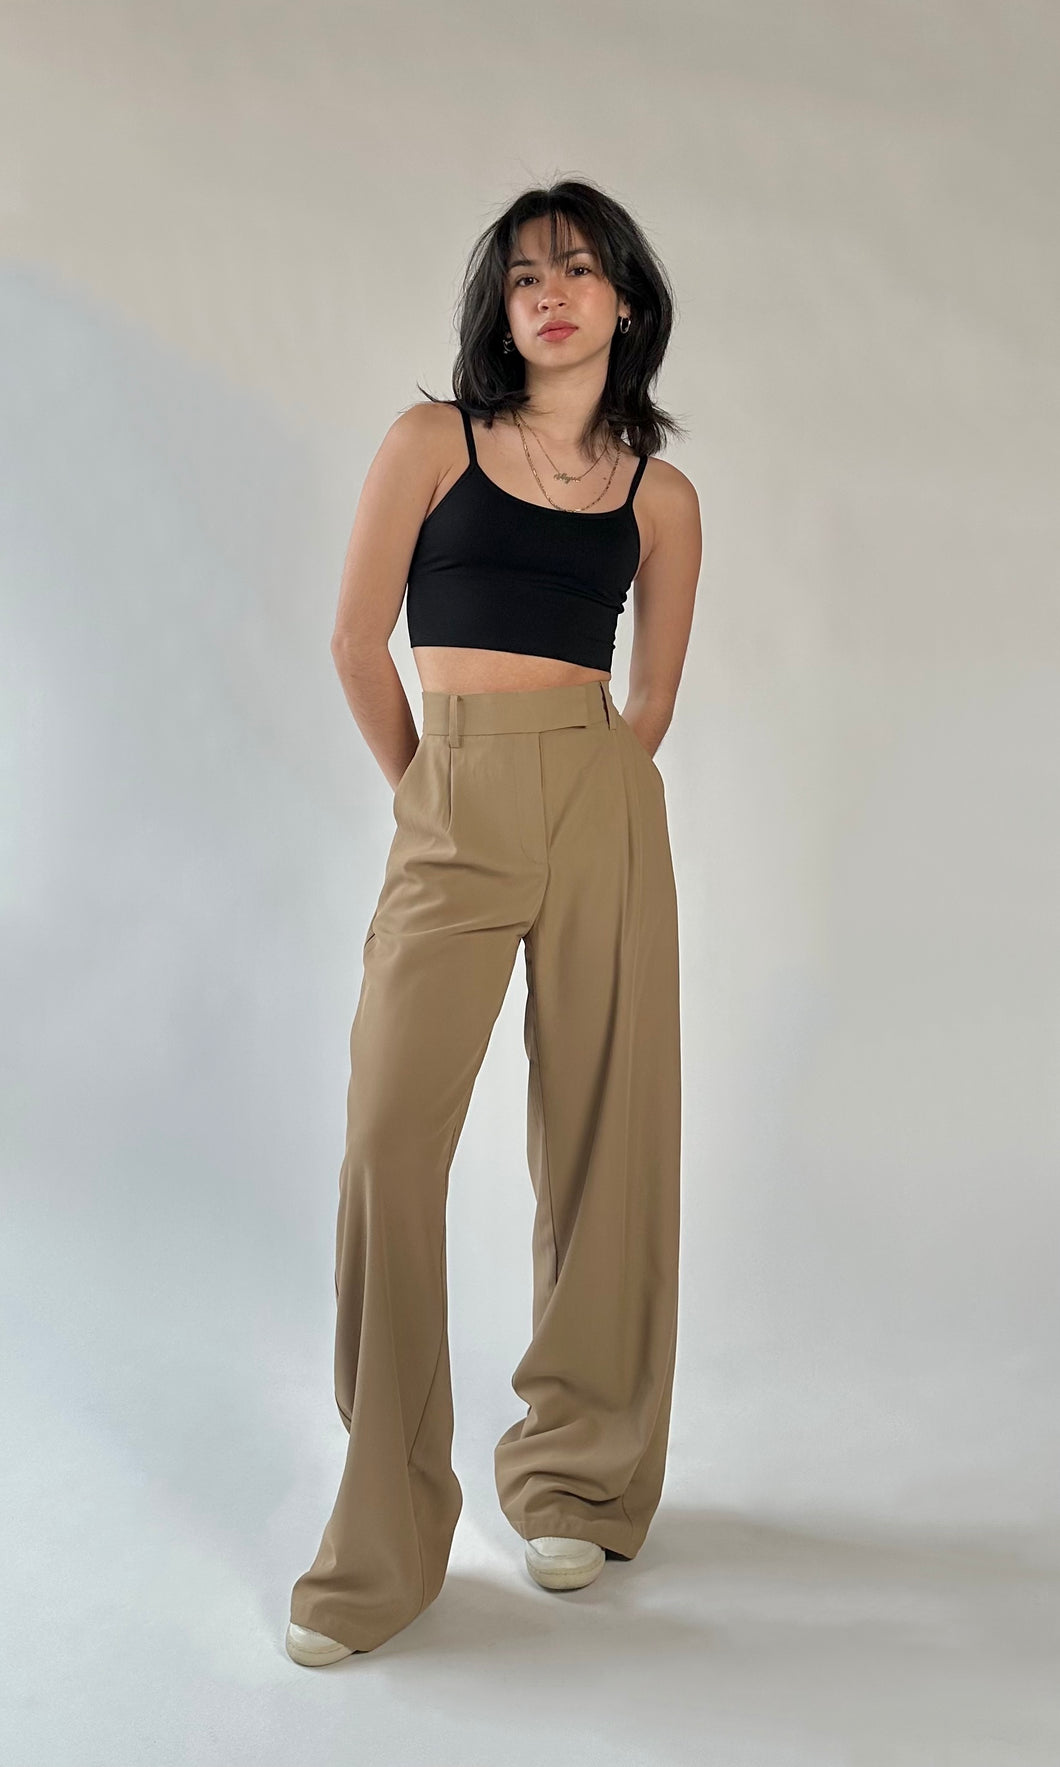 HAVERHILL HIGH WAIST TROUSERS IN TAUPE